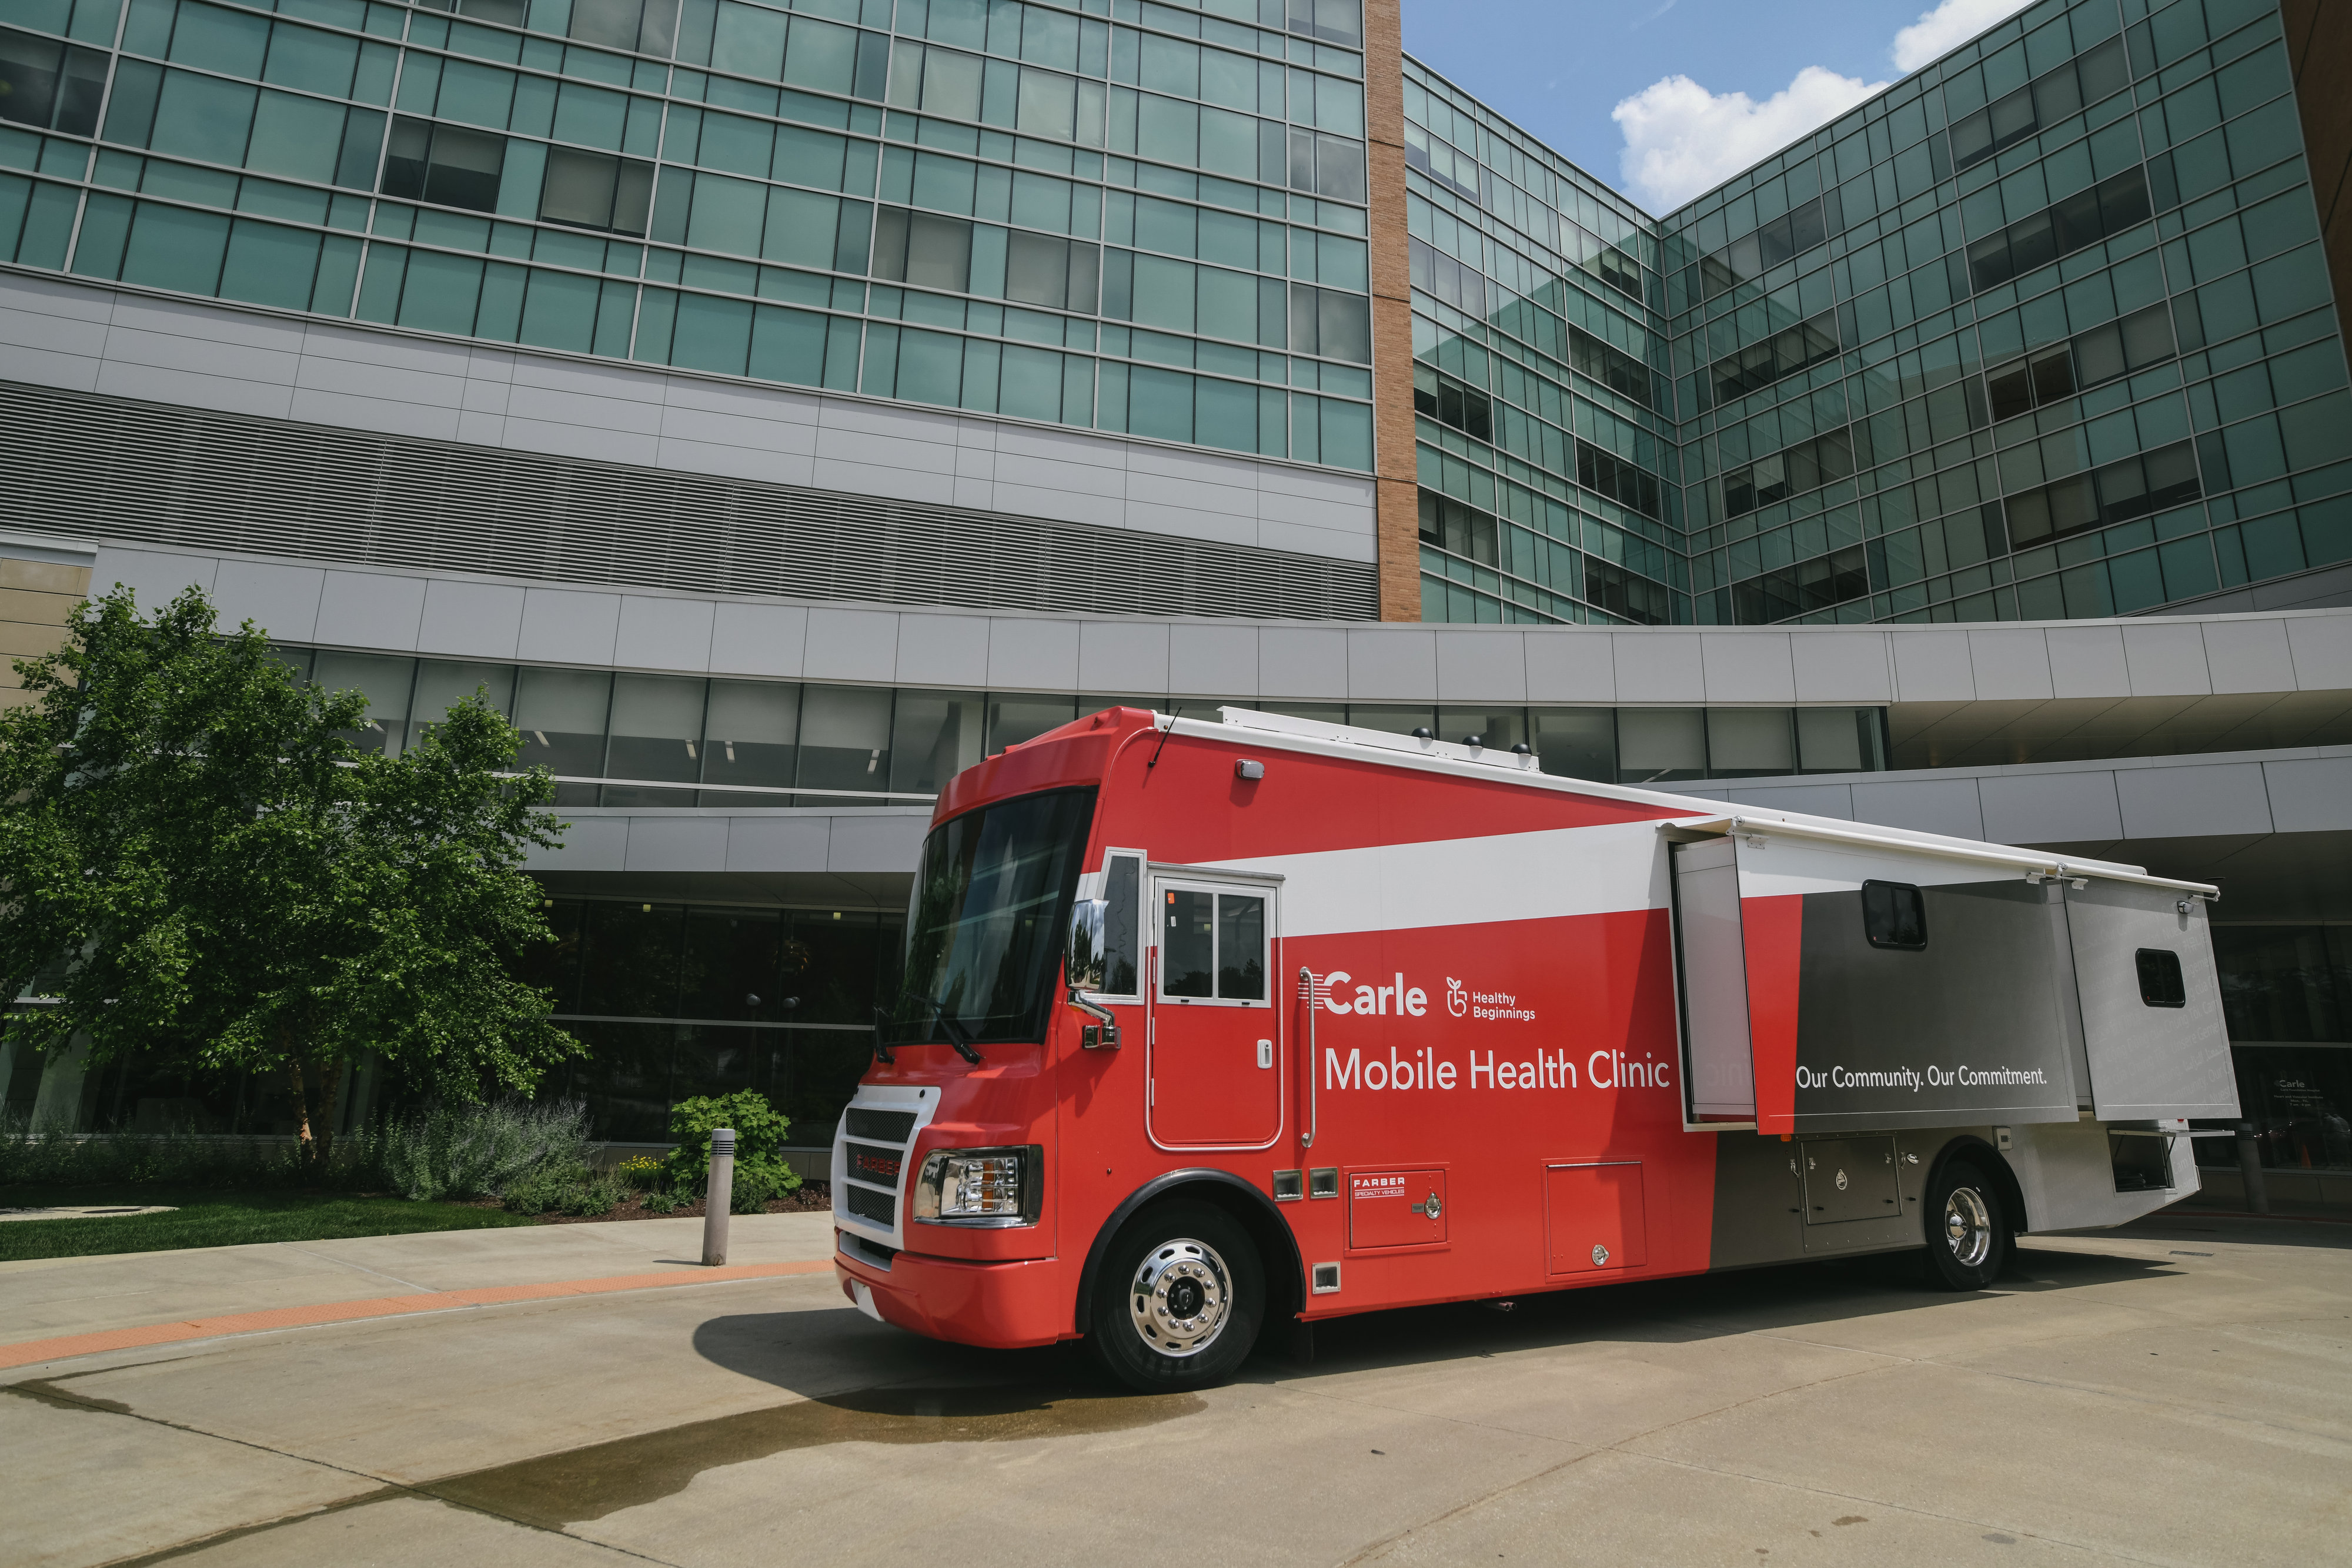 Mobile Health Clinic to reach more kids thanks to second phase of federal grant